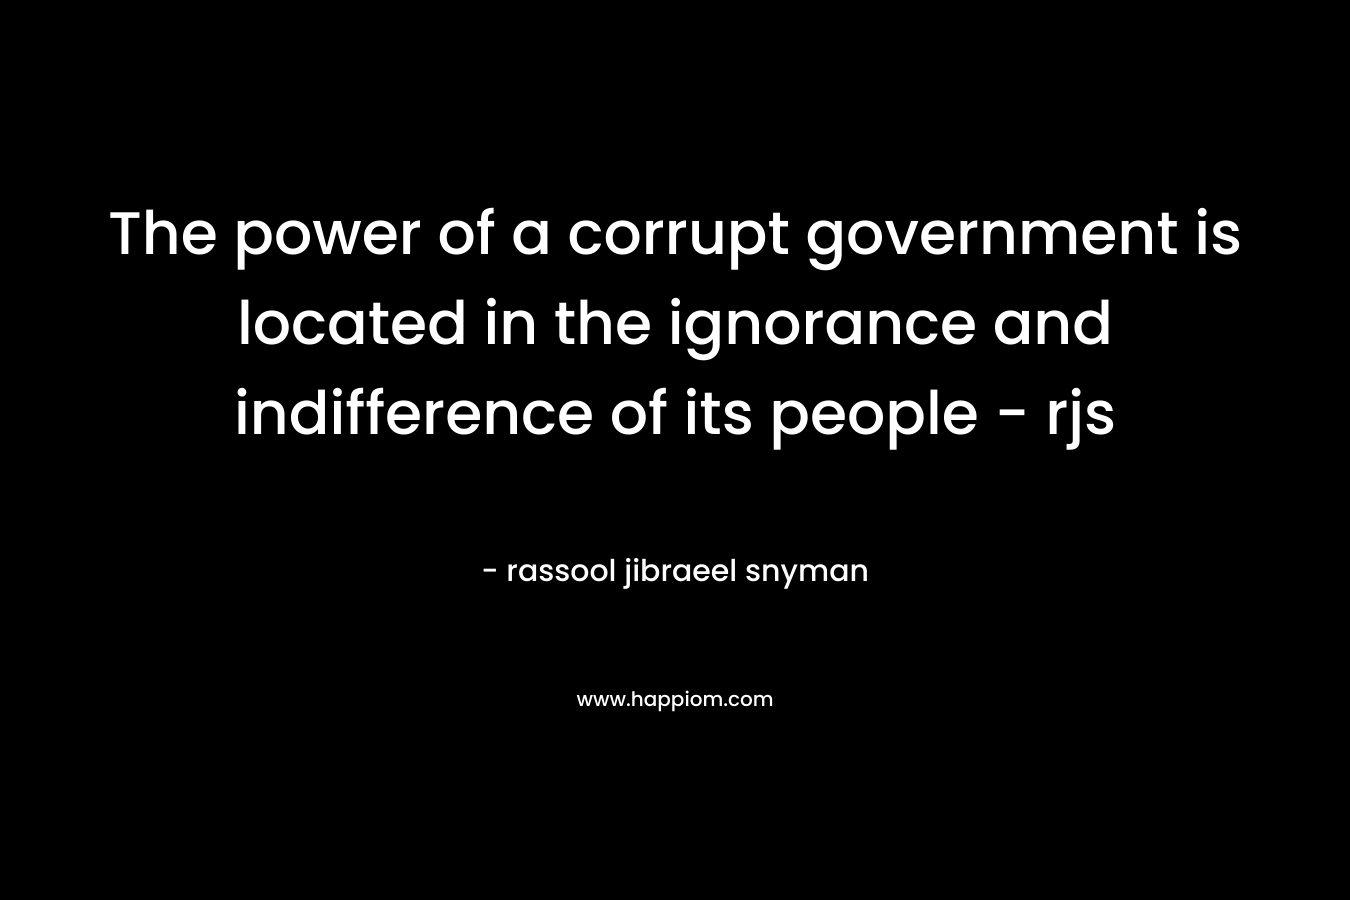 The power of a corrupt government is located in the ignorance and indifference of its people - rjs